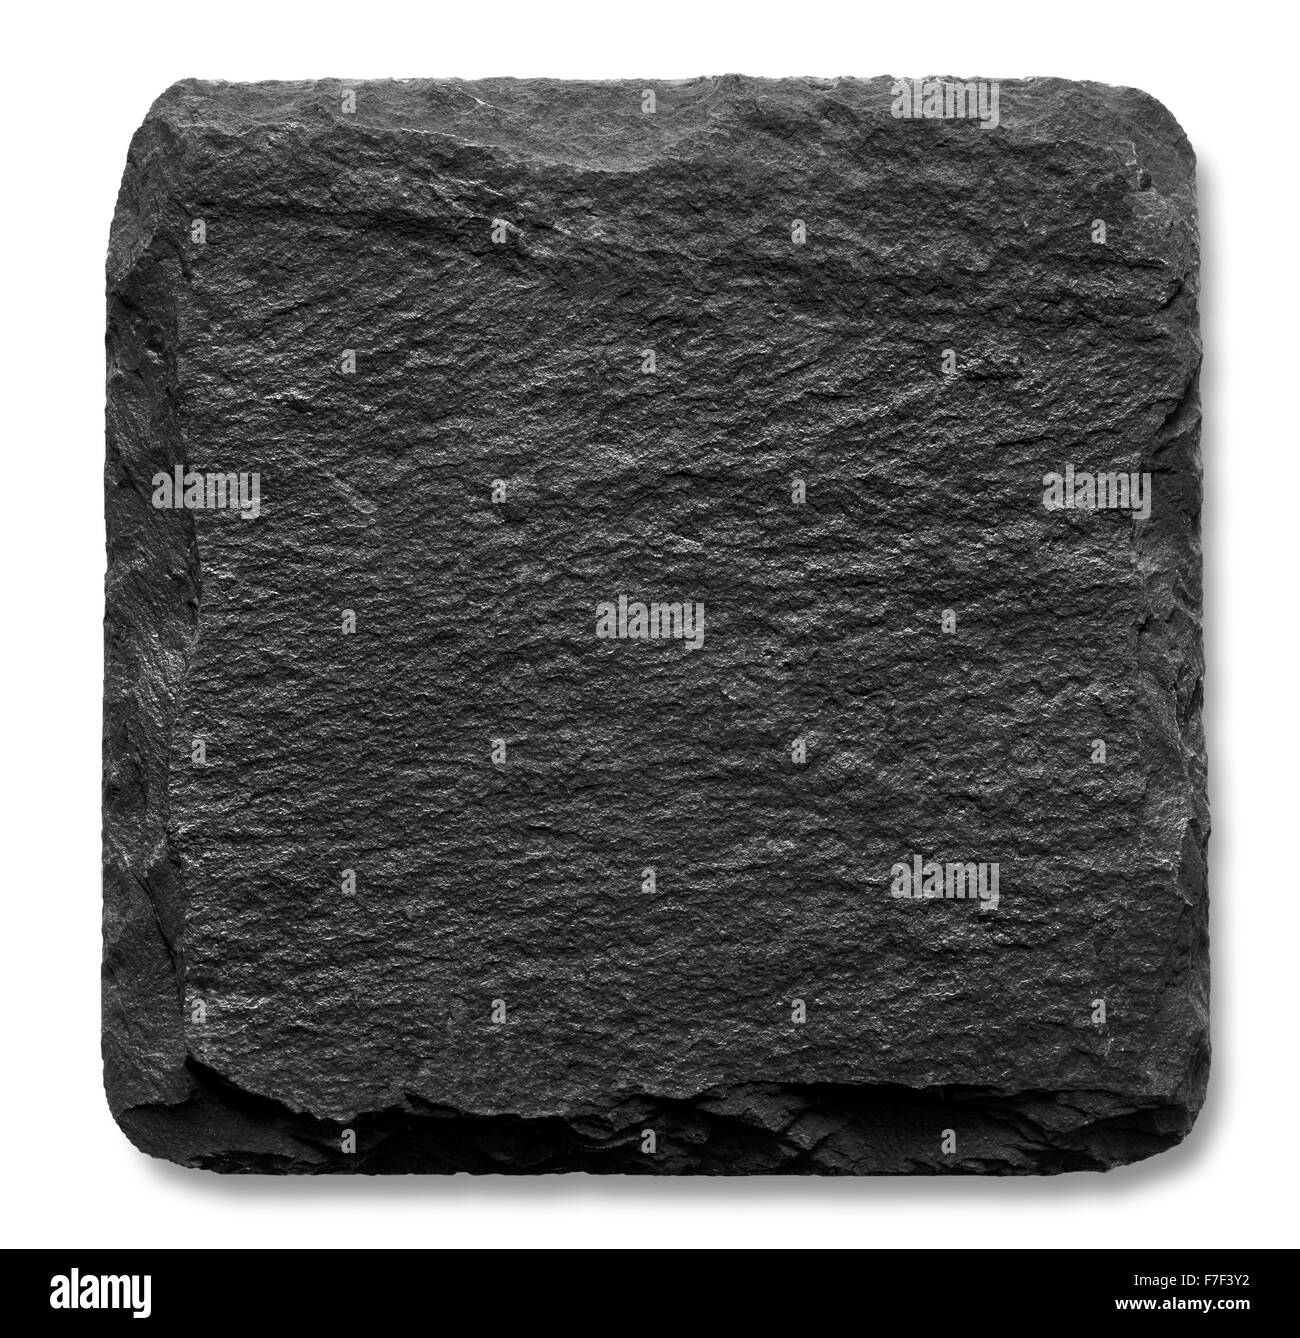 Square slate stand isolated on a white background Stock Photo